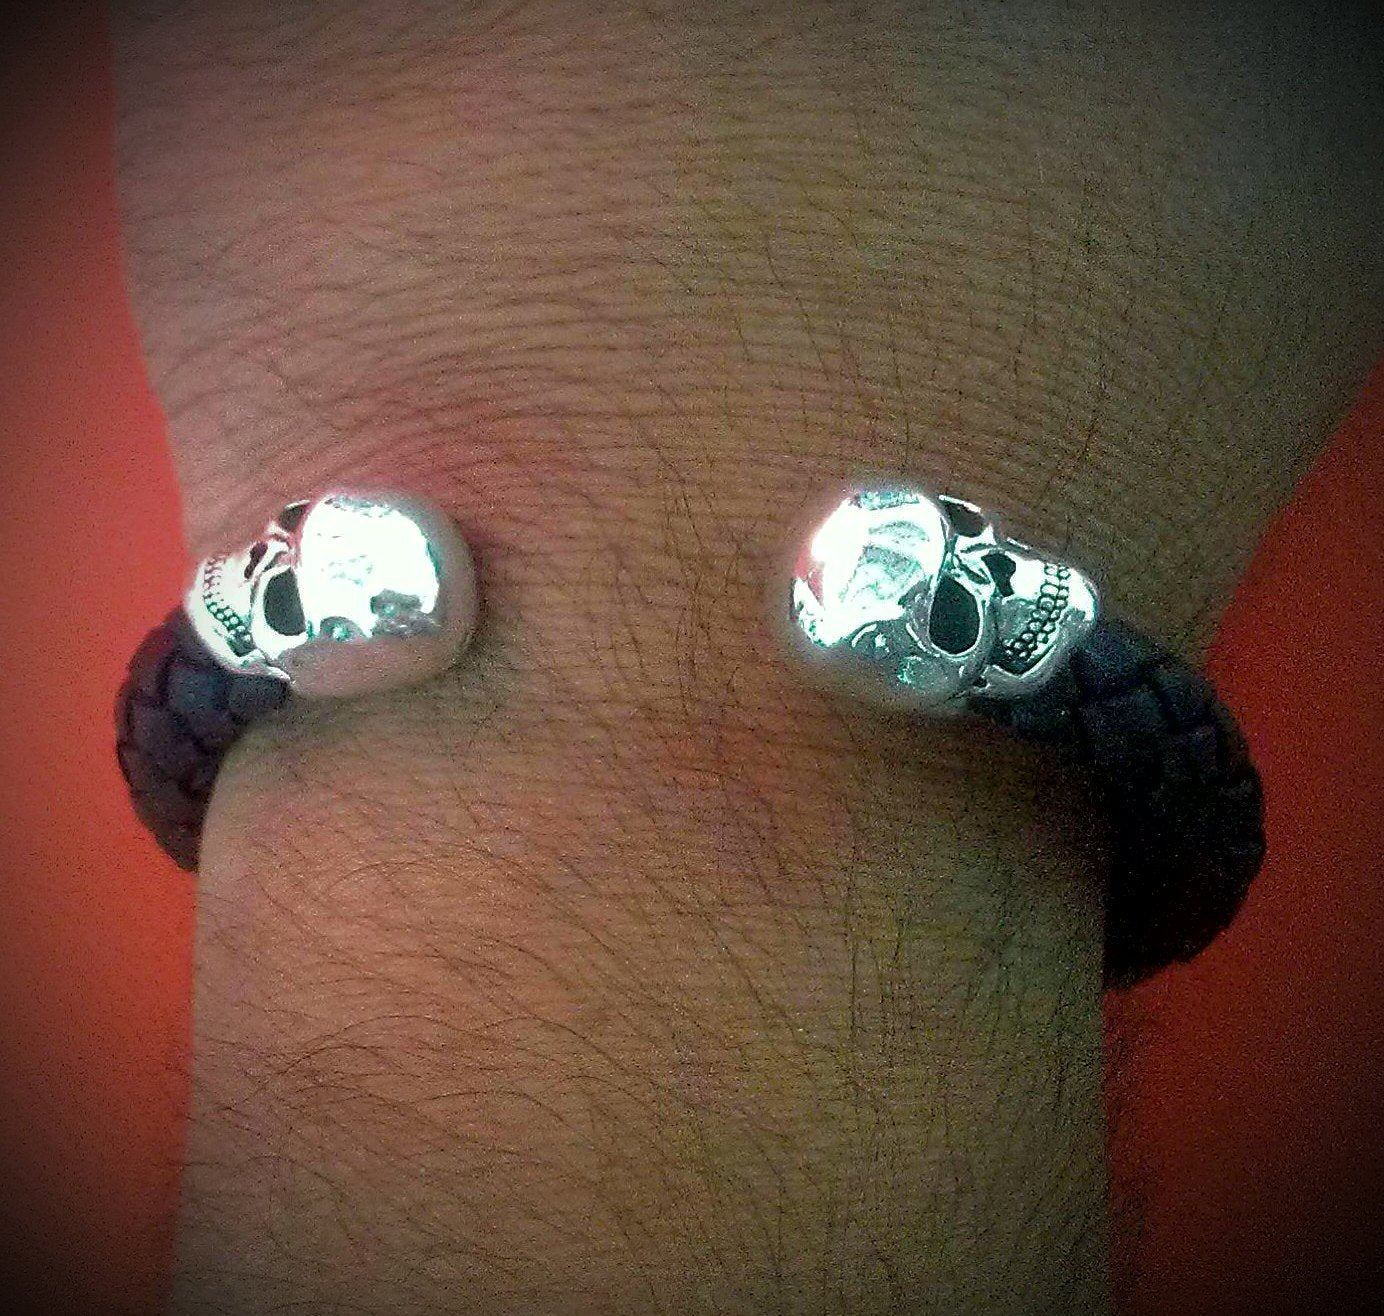 Sterling Silver Skull Braided Leather Cuff